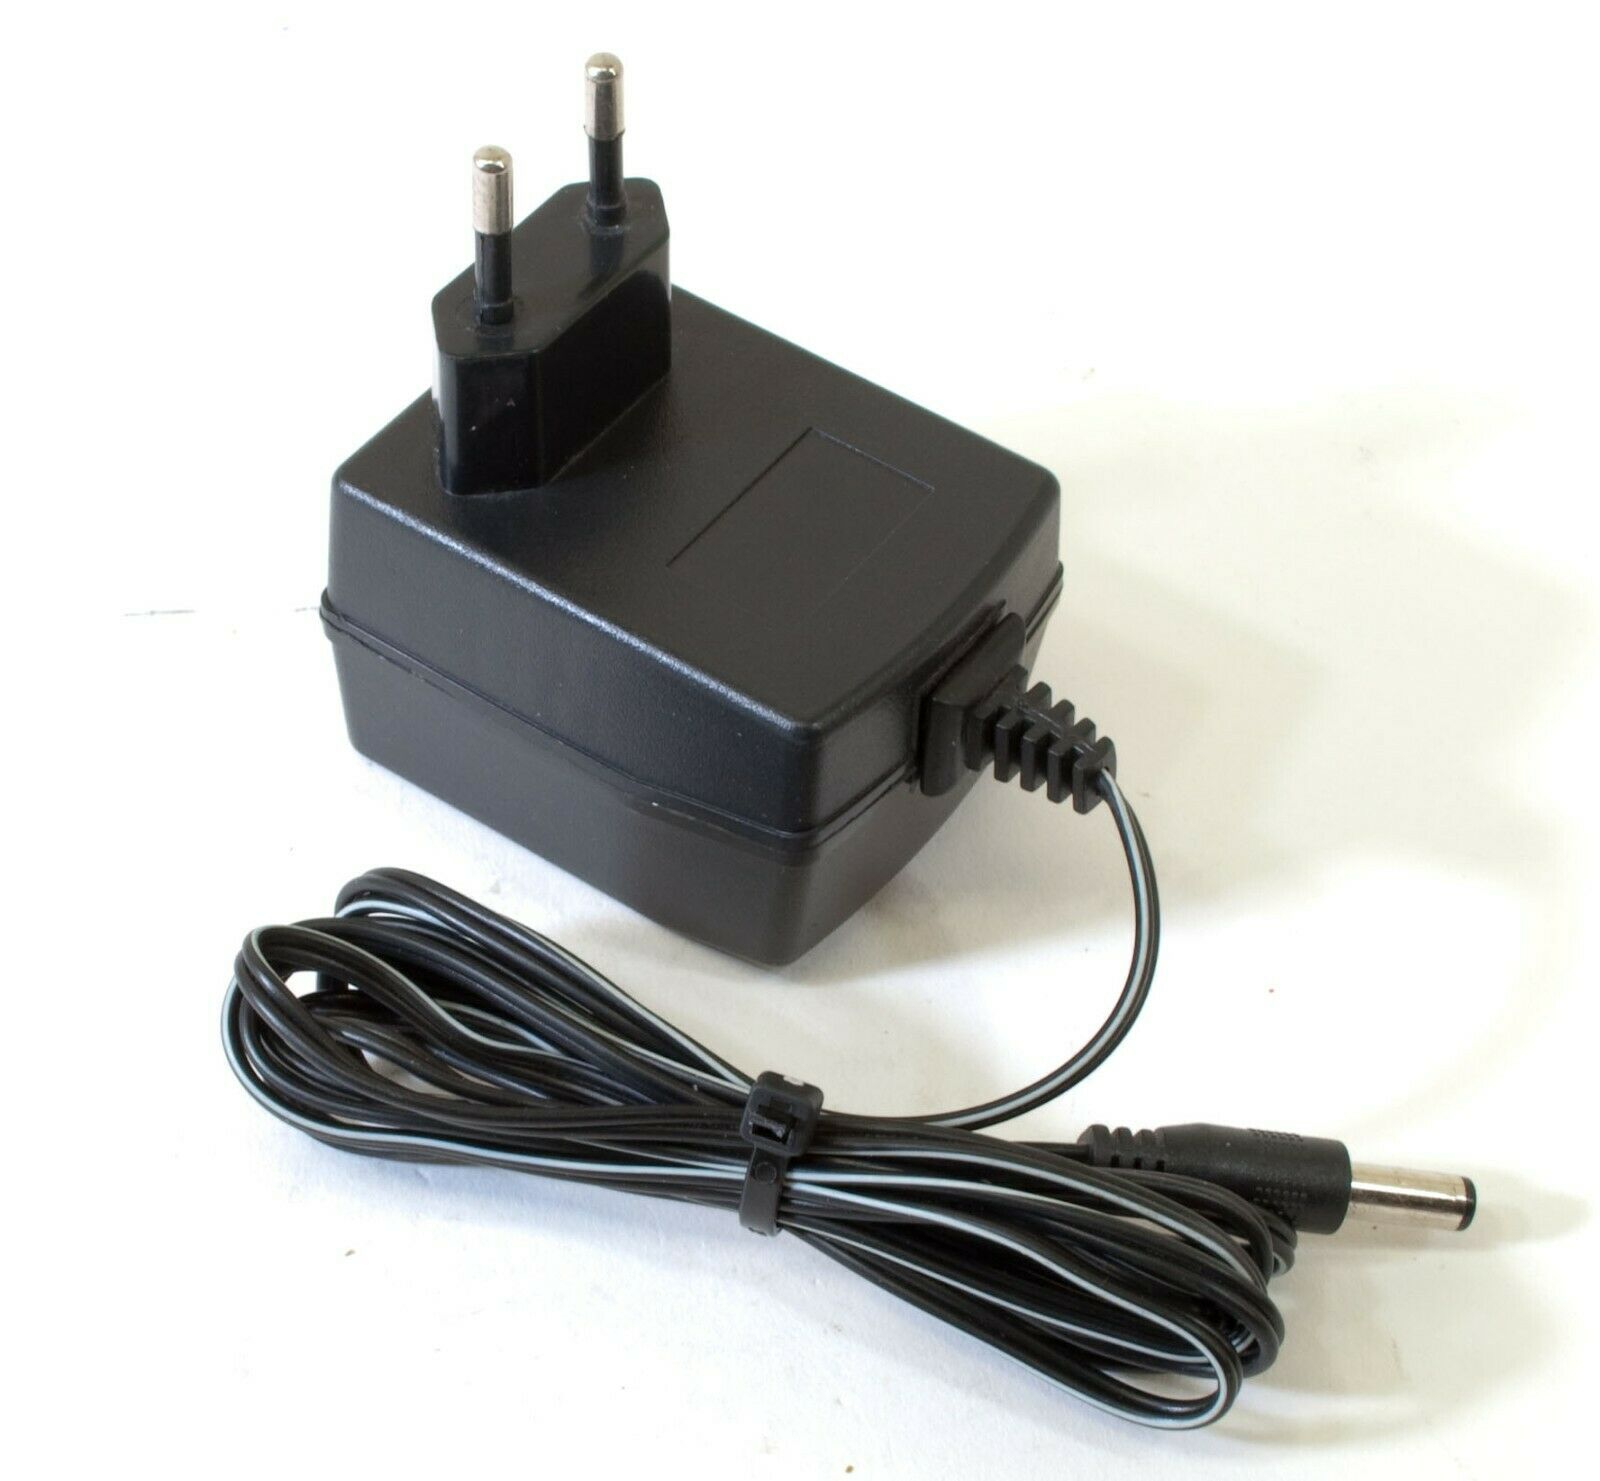 Yuyao Anyuan AYDC-12V500 AC Adapter 12V 500mA Power Supply Output Current: 500 mA Voltage: 12 V MPN: AYDC-12V500 Typ - Click Image to Close